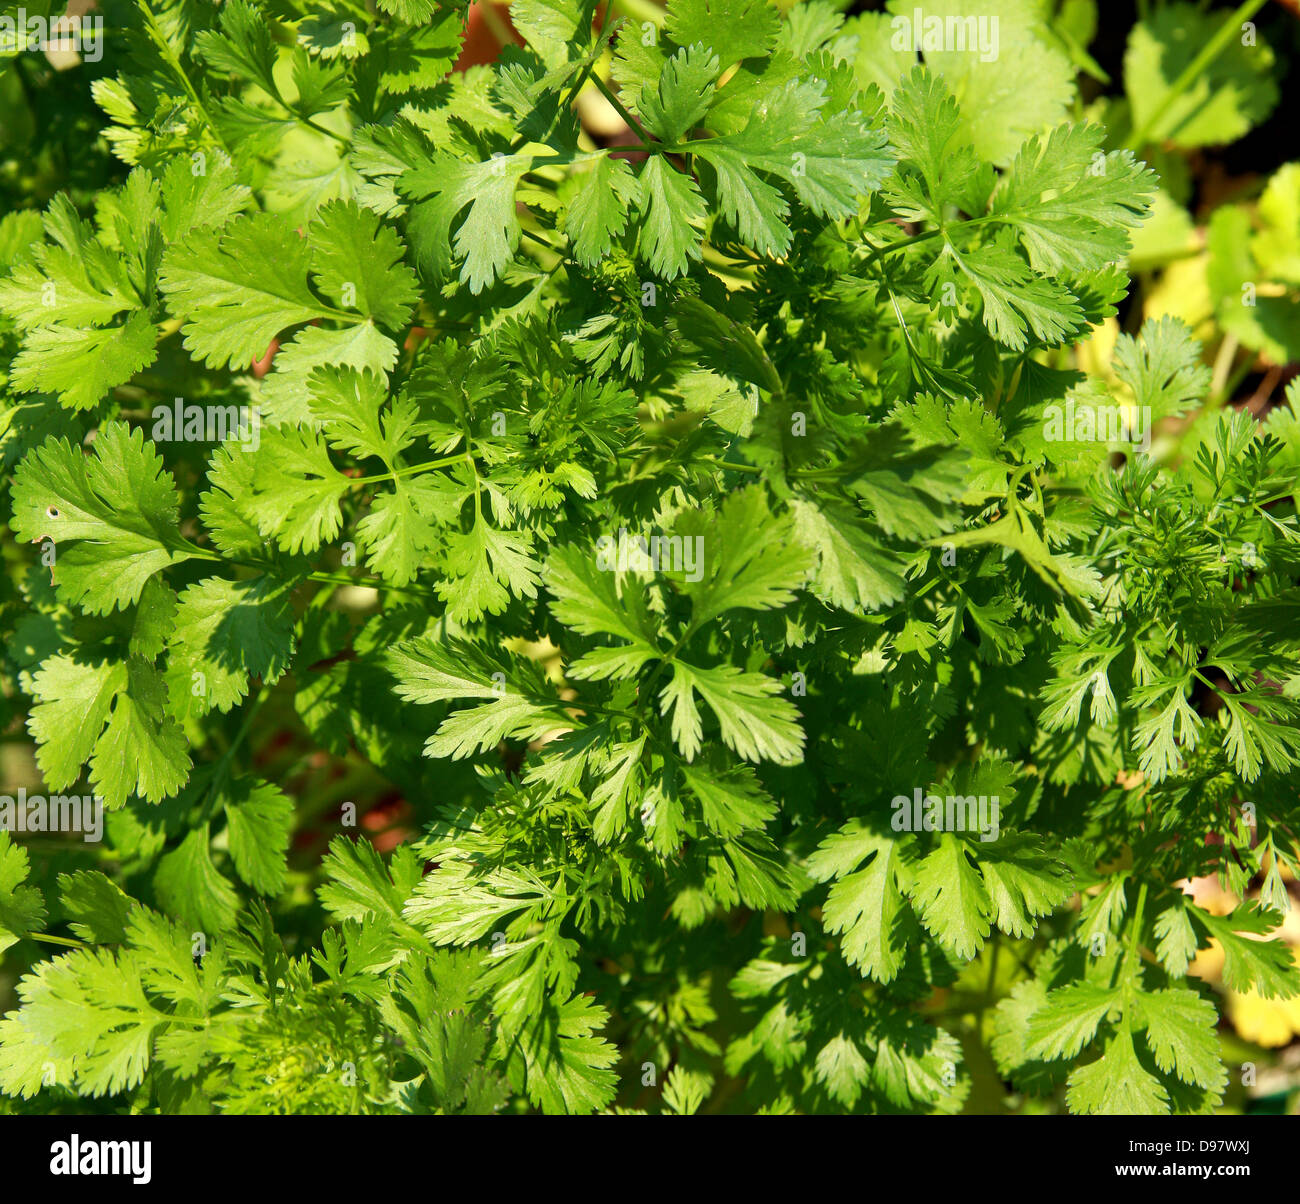 Coriander, Coriandrum sativum, Apiaceae. Also known as cilantro, Chinese parsley or dhania, is a herb in the family Apiaceae. Stock Photo